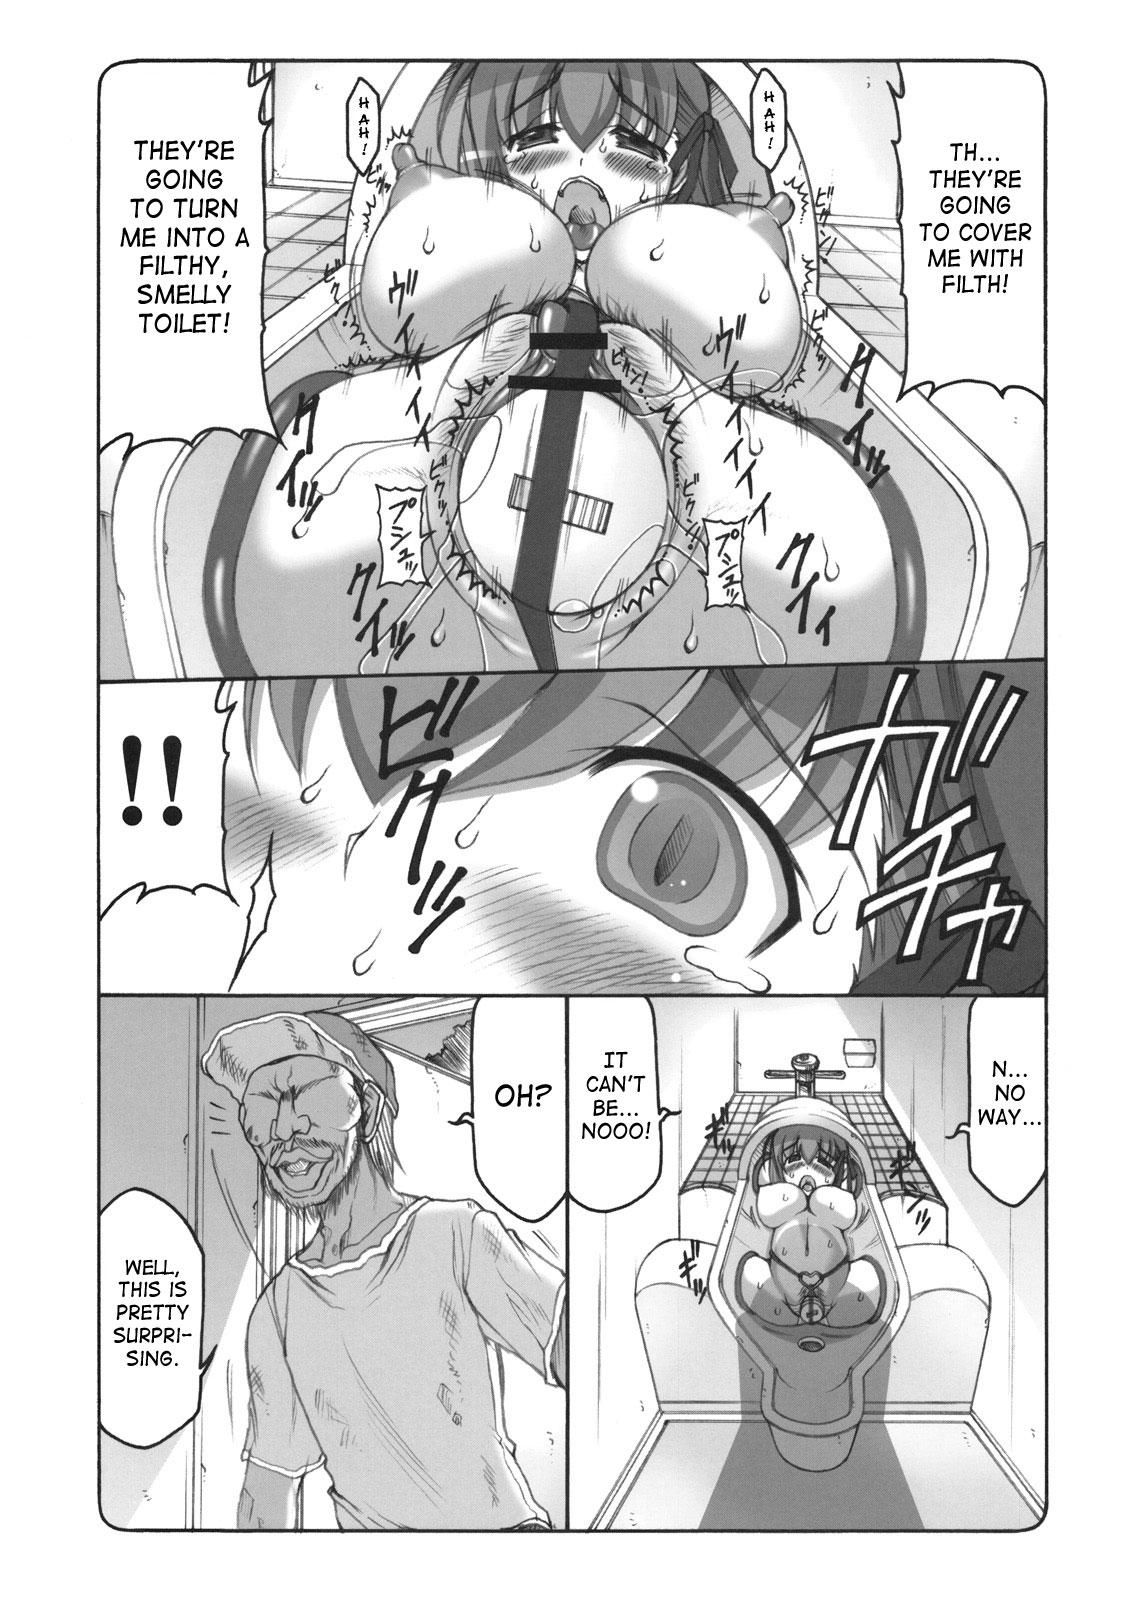 Smooth Kotori 5 - Fate stay night Uncensored - Page 7